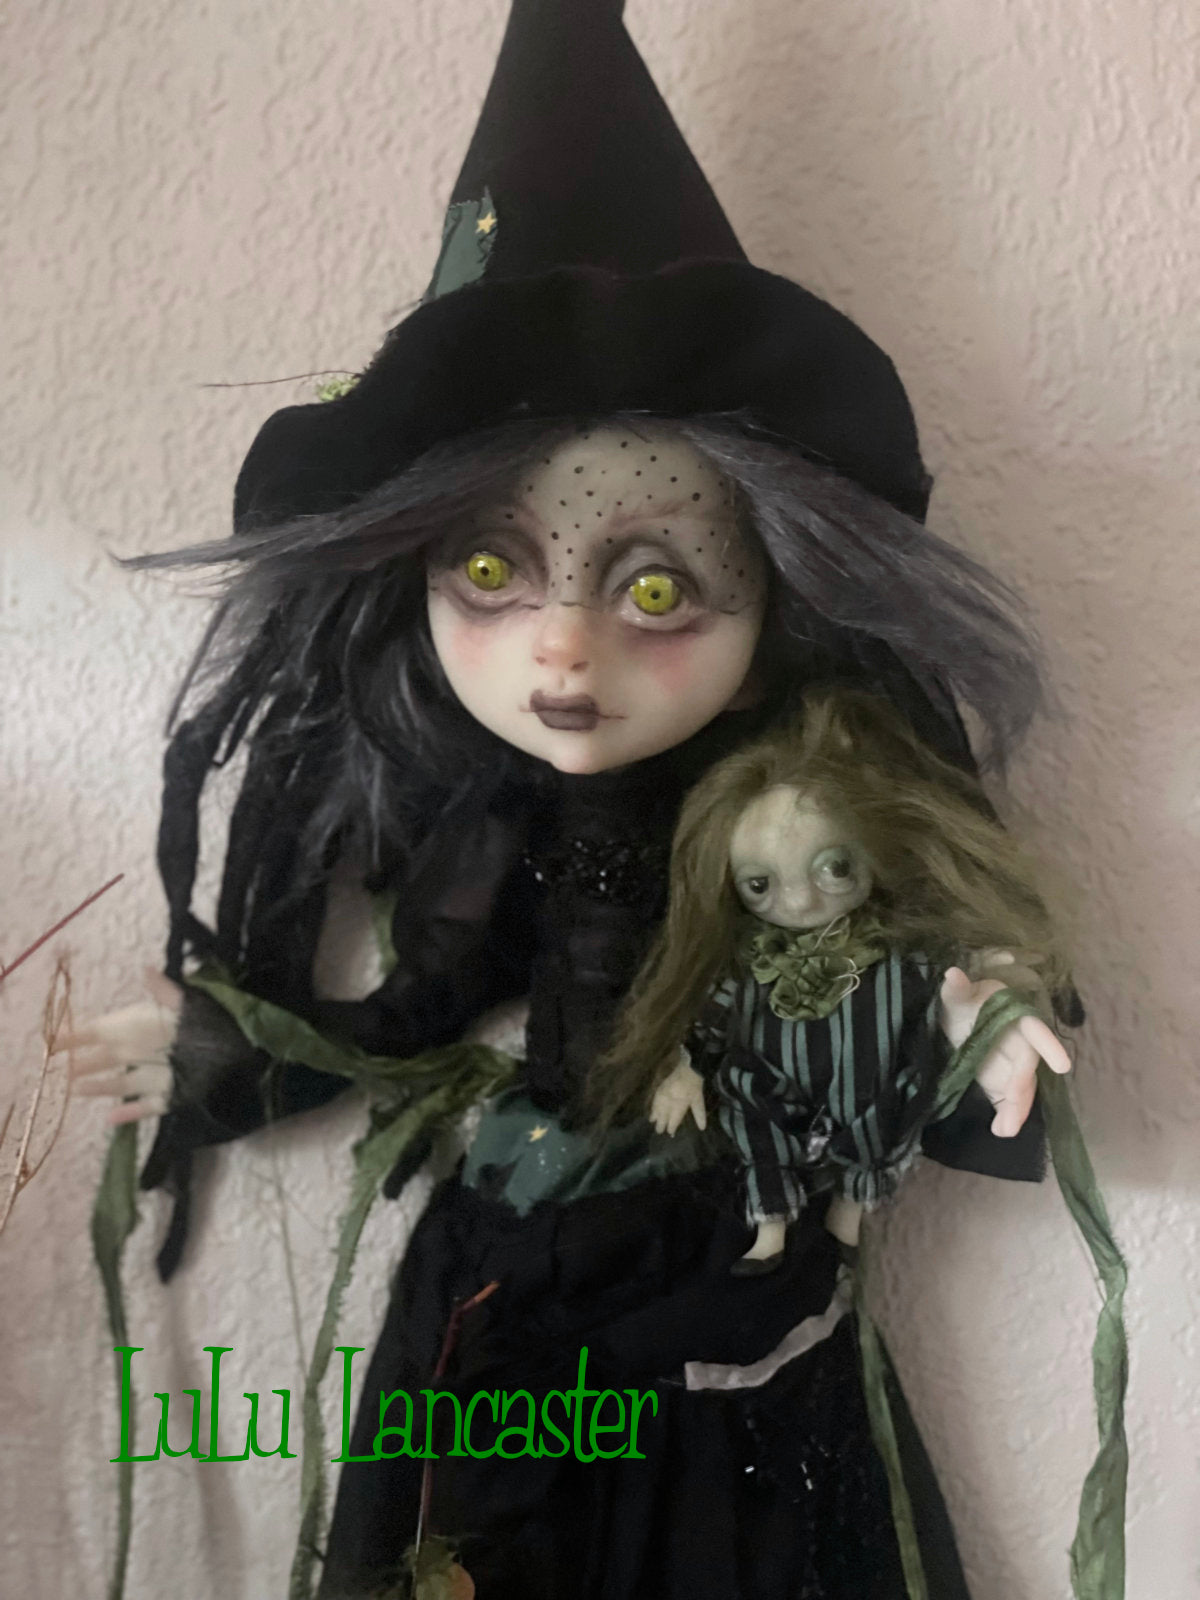 Sabine Witch of the woods wall hanging Original LuLu Lancaster Art Doll